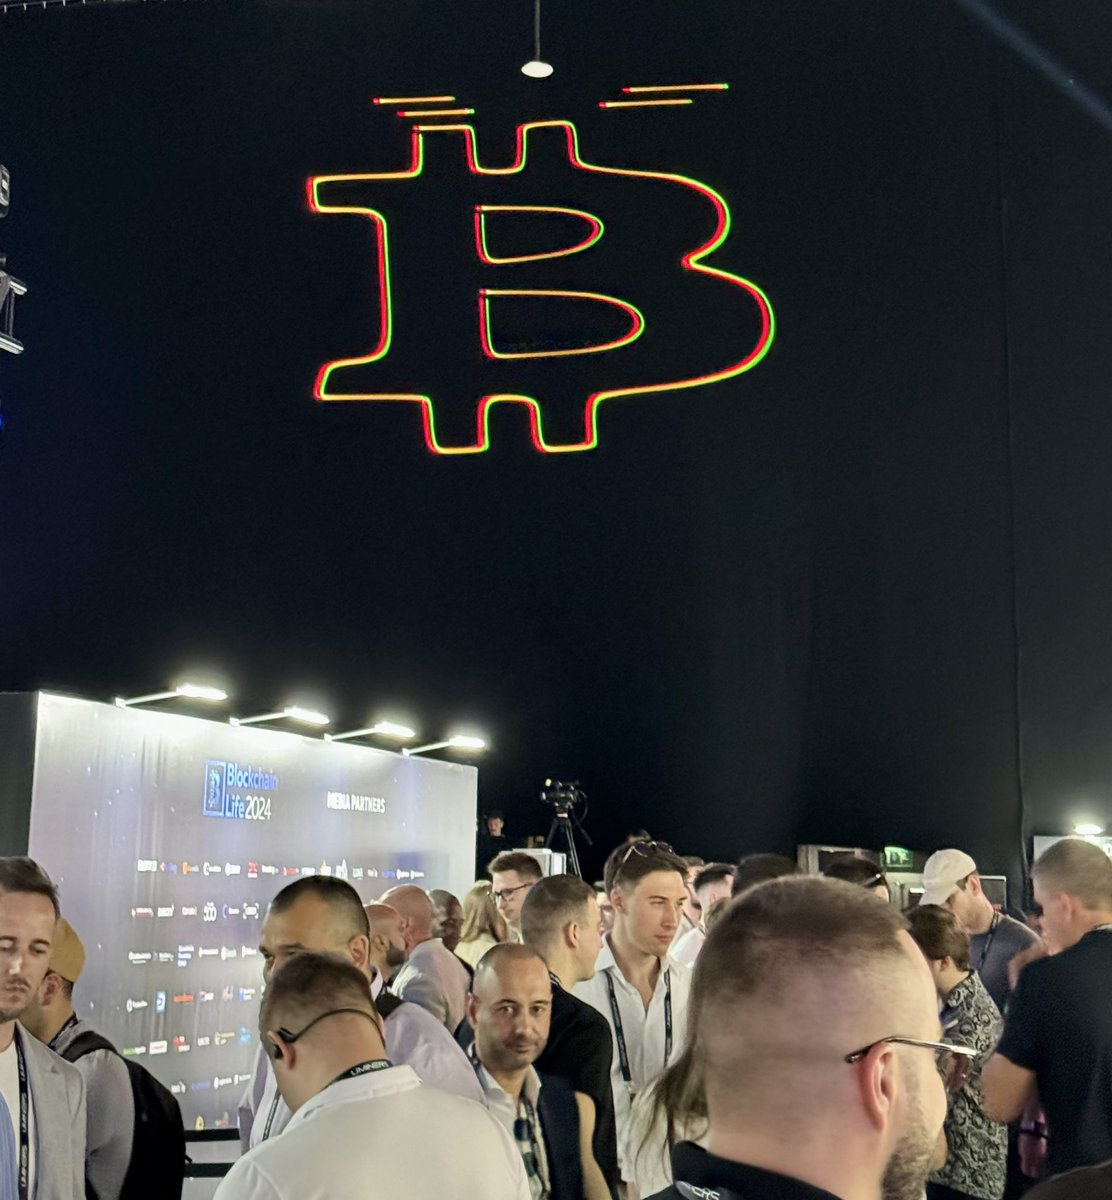 #Bitcoin and #Ethereum spot #ETF has been approved in Hong Kong. With #halving approaching in a few days crypto community seems to be more than ready for another bull run. It’s a good idea to be in #Dubai these days! #blochainlife #globalblockchainshow #token2049dubai